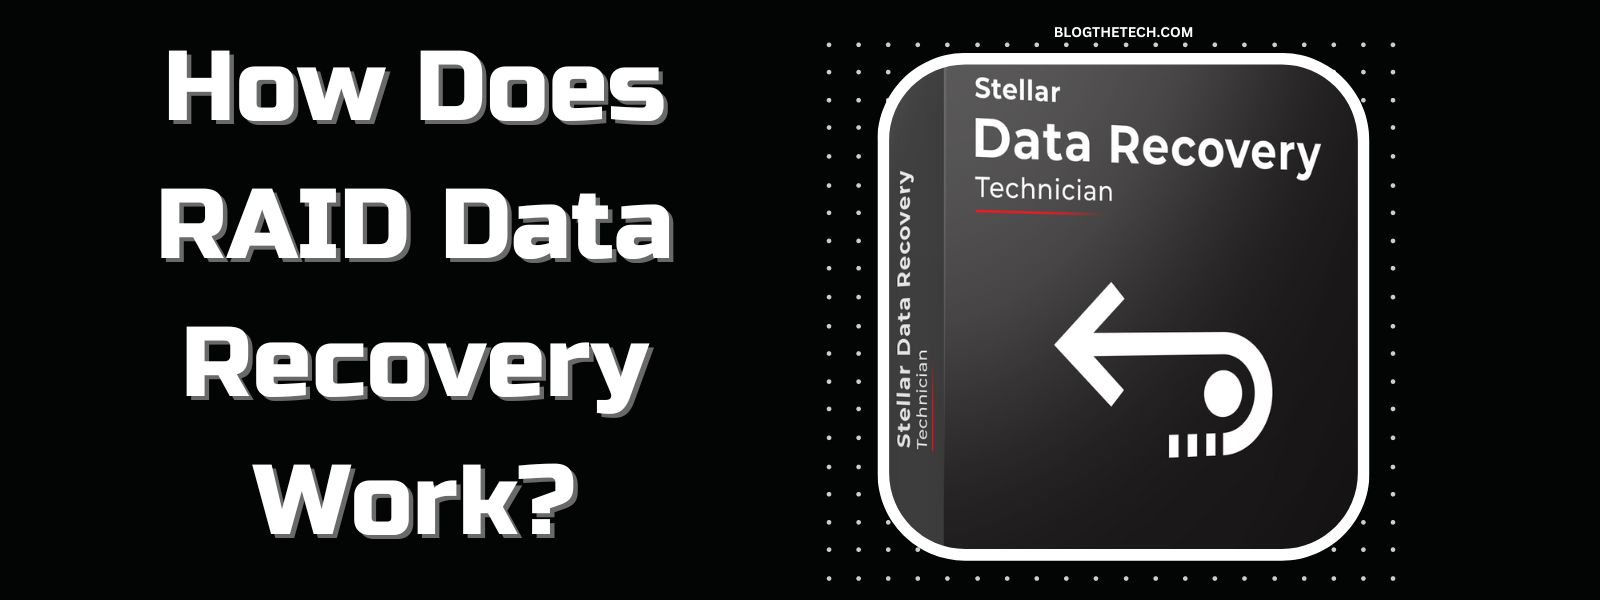 How-Does-RAID-Data-Recovery-Work-Featured